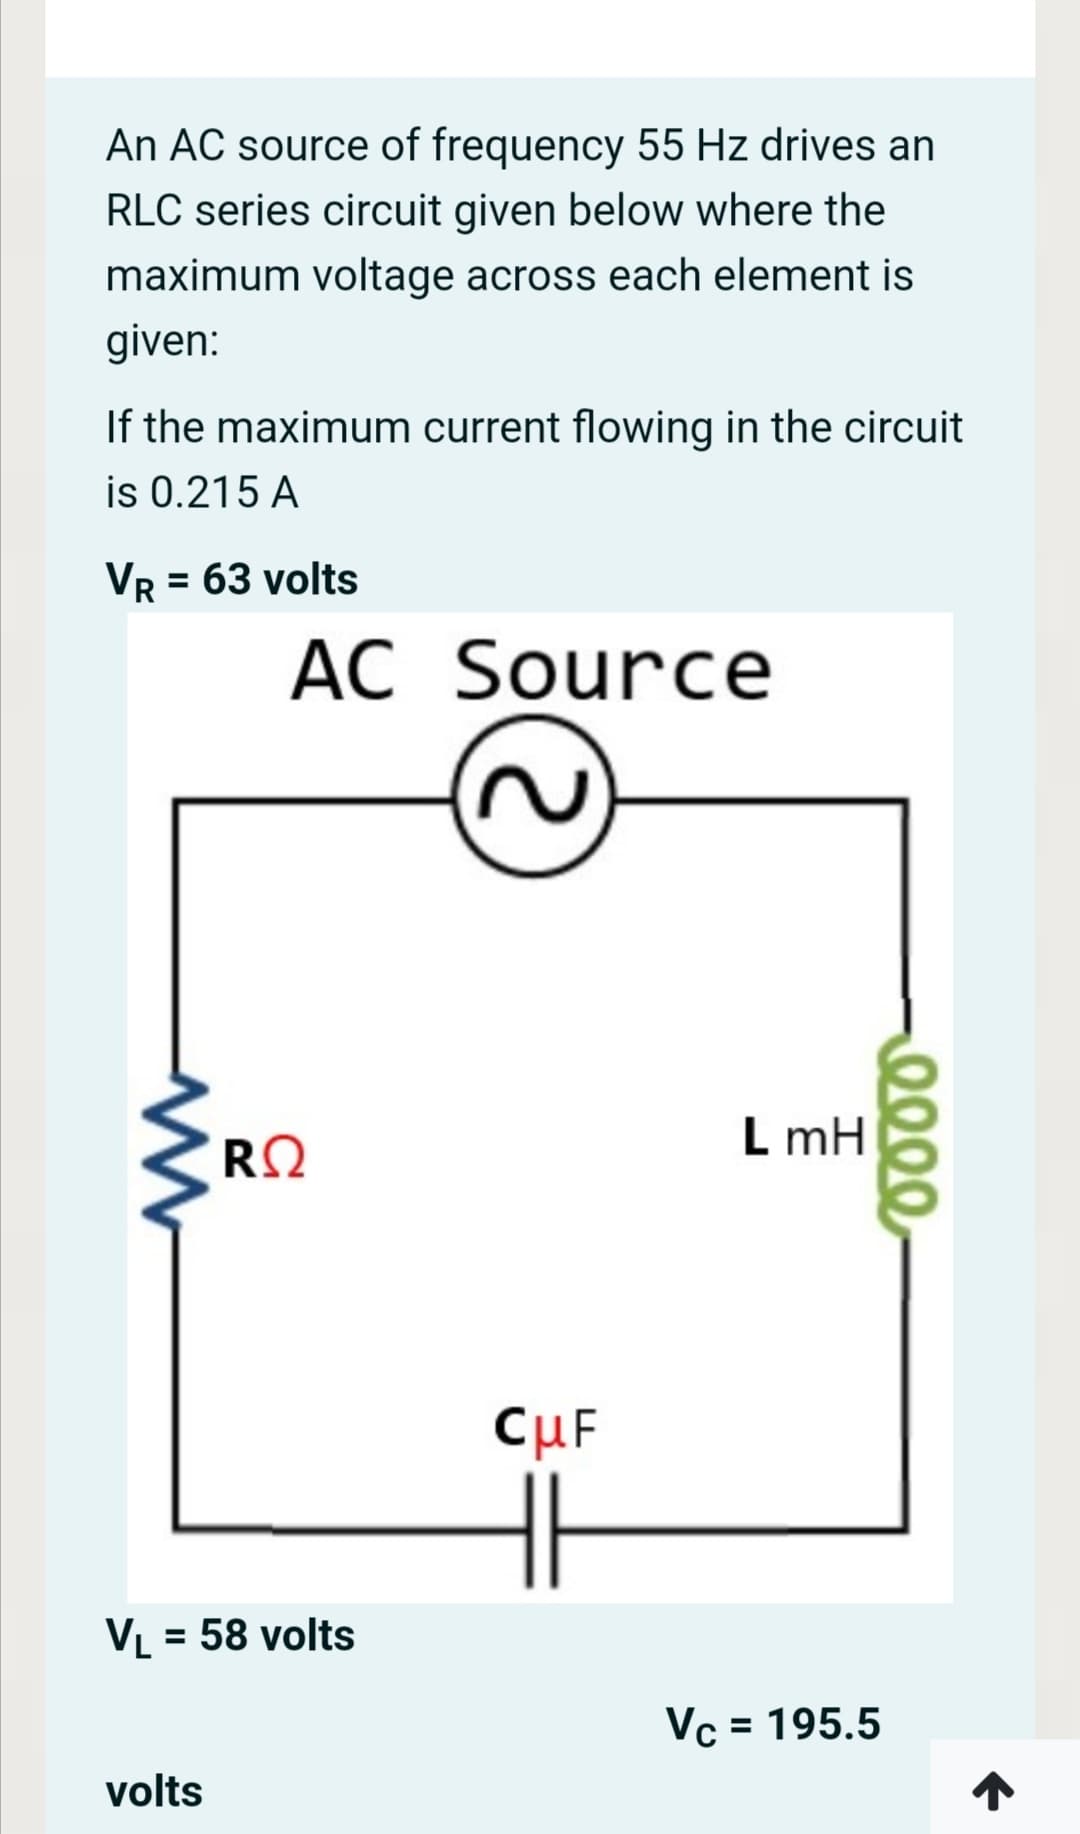 An AC source of frequency 55 Hz drives an
RLC series circuit given below where the
maximum voltage across each element is
given:
If the maximum current flowing in the circuit
is 0.215 A
Vr = 63 volts
AC Source
RQ
L mH
CuF
VL = 58 volts
%3D
Vc = 195.5
%3D
volts
0000
